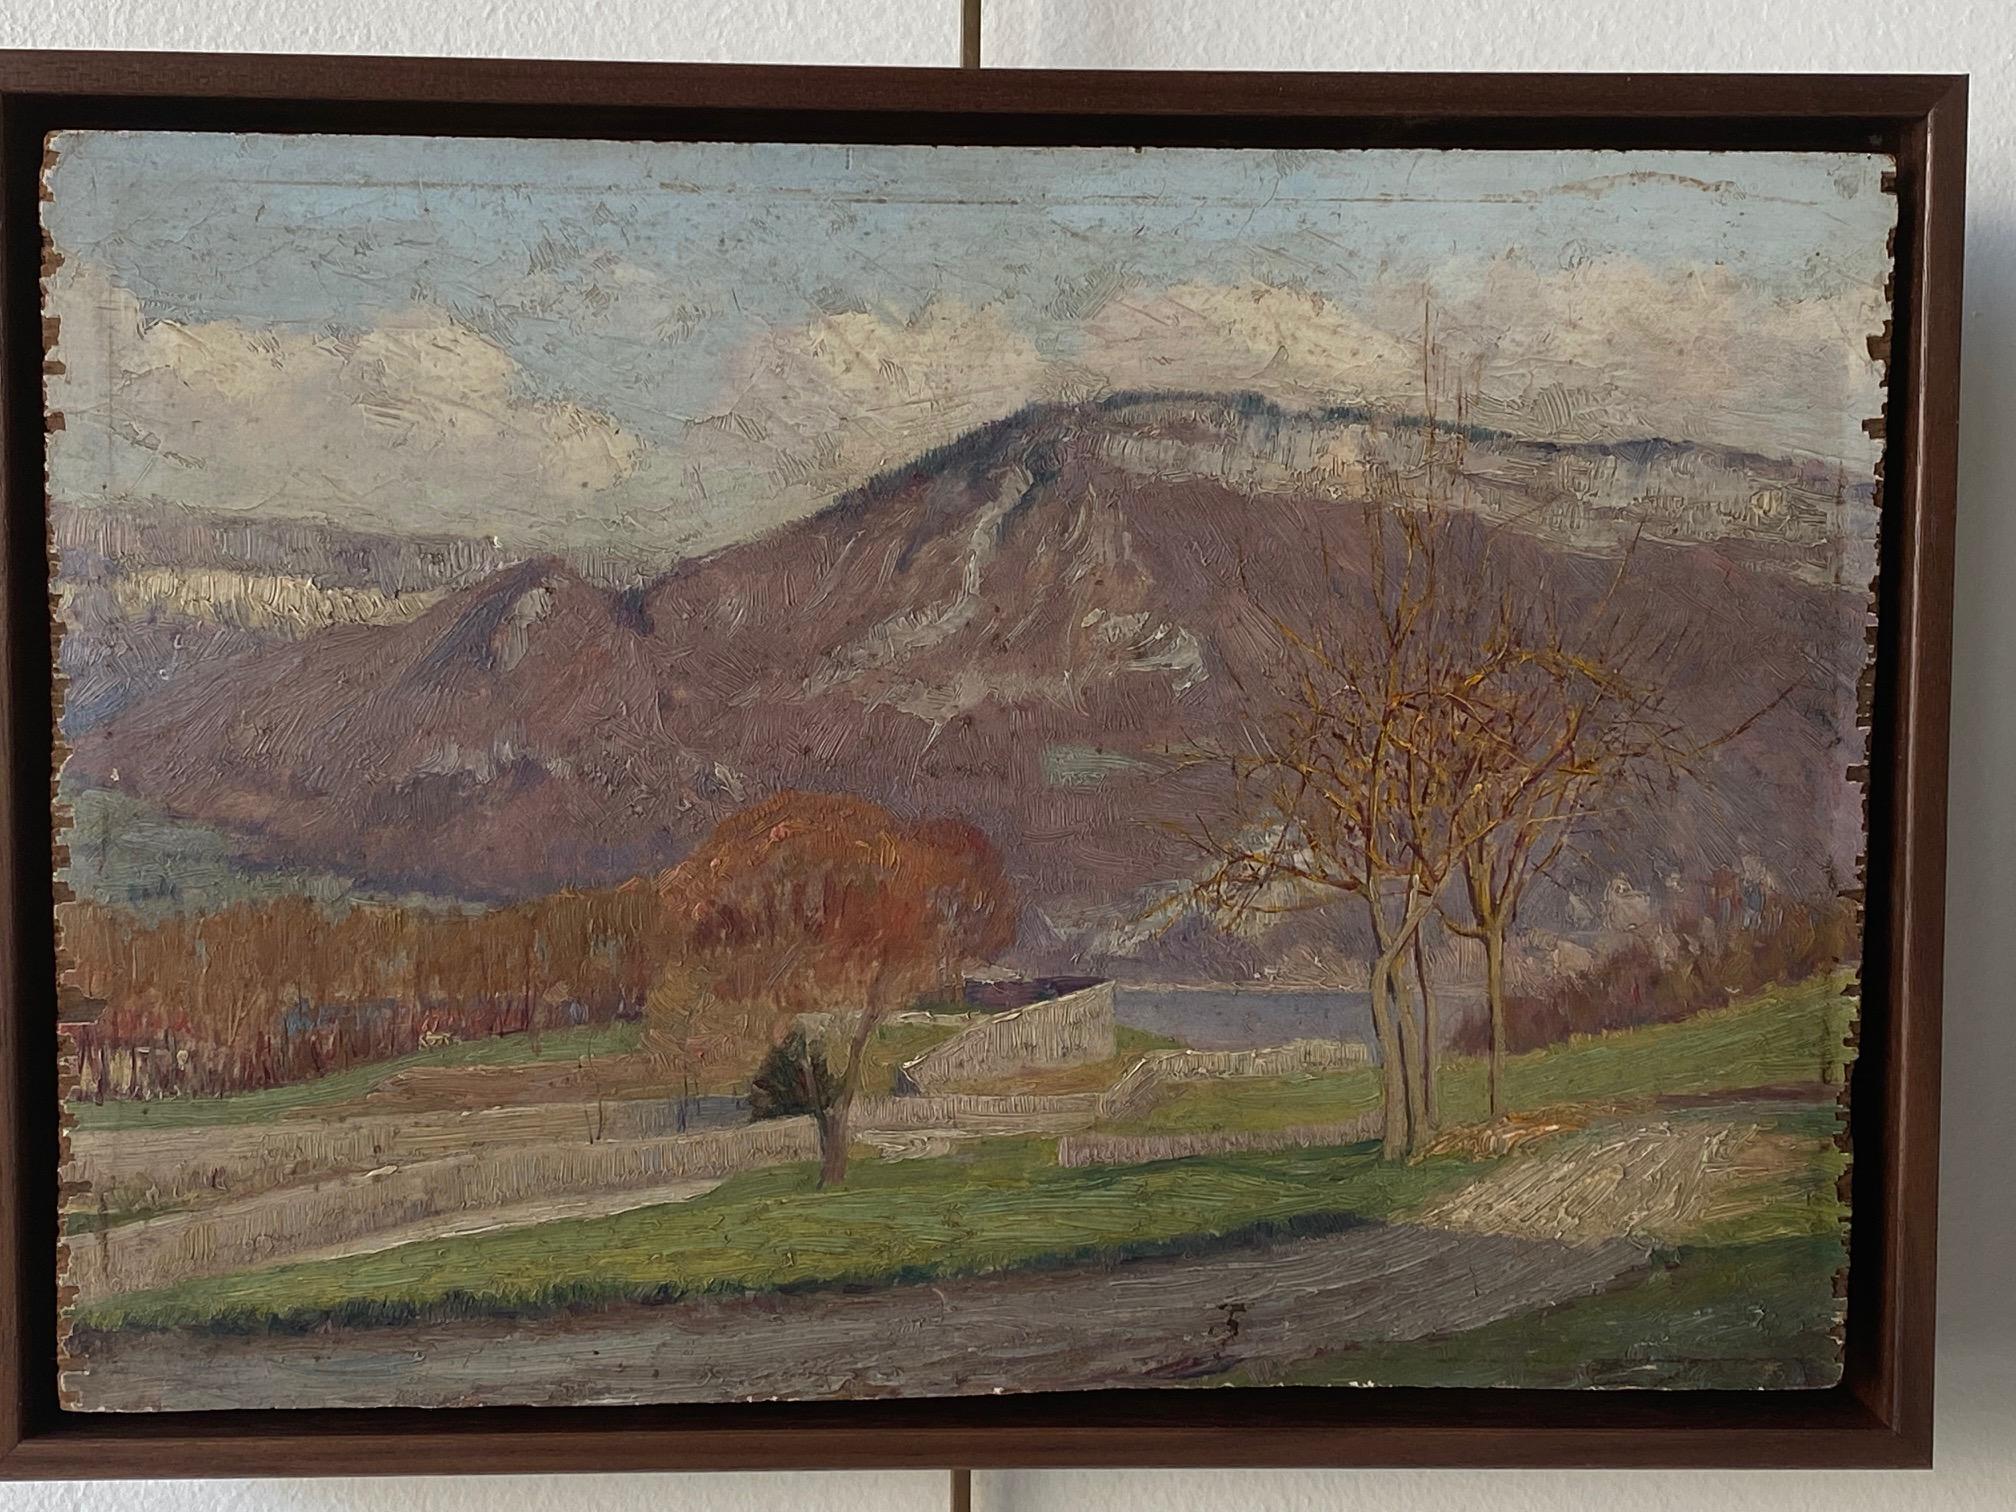 Vintage landscape with rustic edges, oil on wood. Newly framed in a walnut floater.